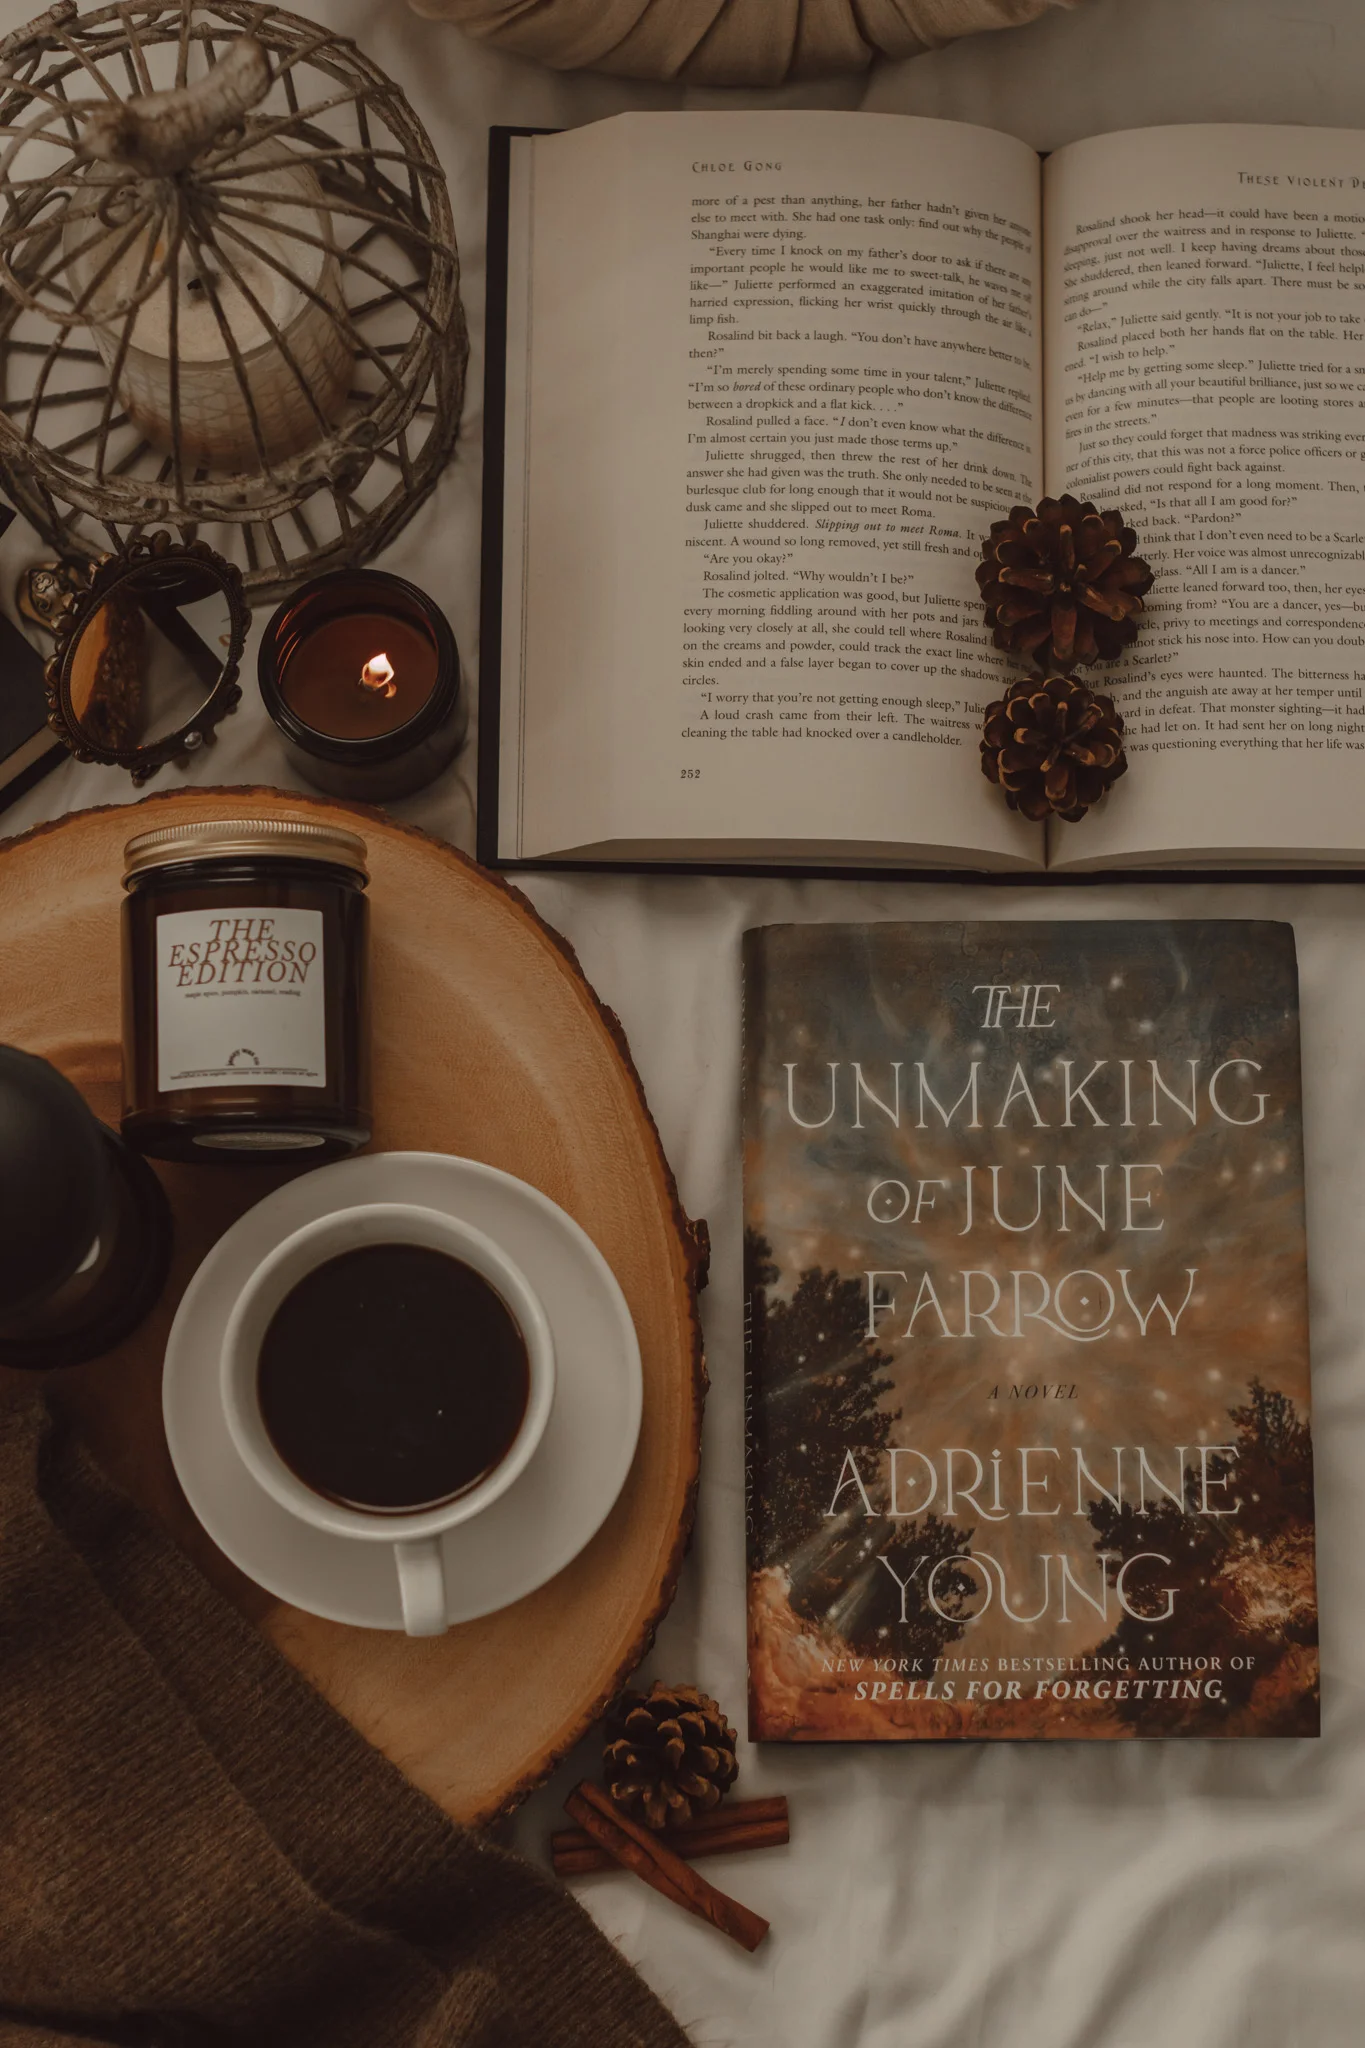 15 Magical Realism Books You Need to Add to Your Reading List by The Espresso Edition cozy bookish blog